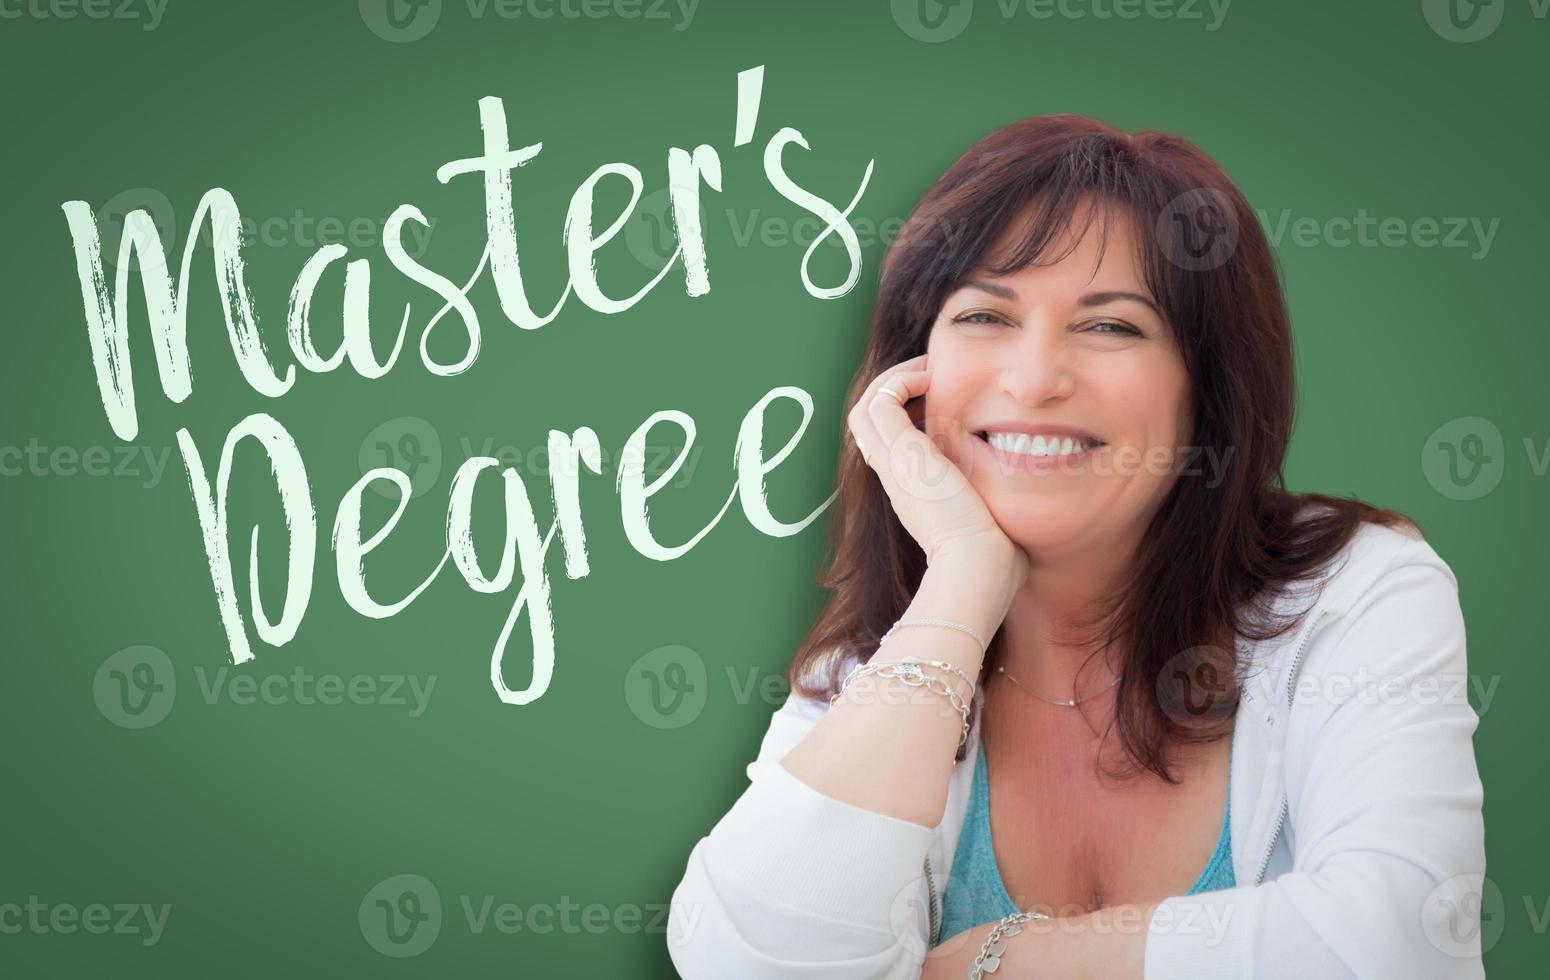 Master's Degree Written On Green Chalkboard Behind Smiling Middle Aged Woman photo